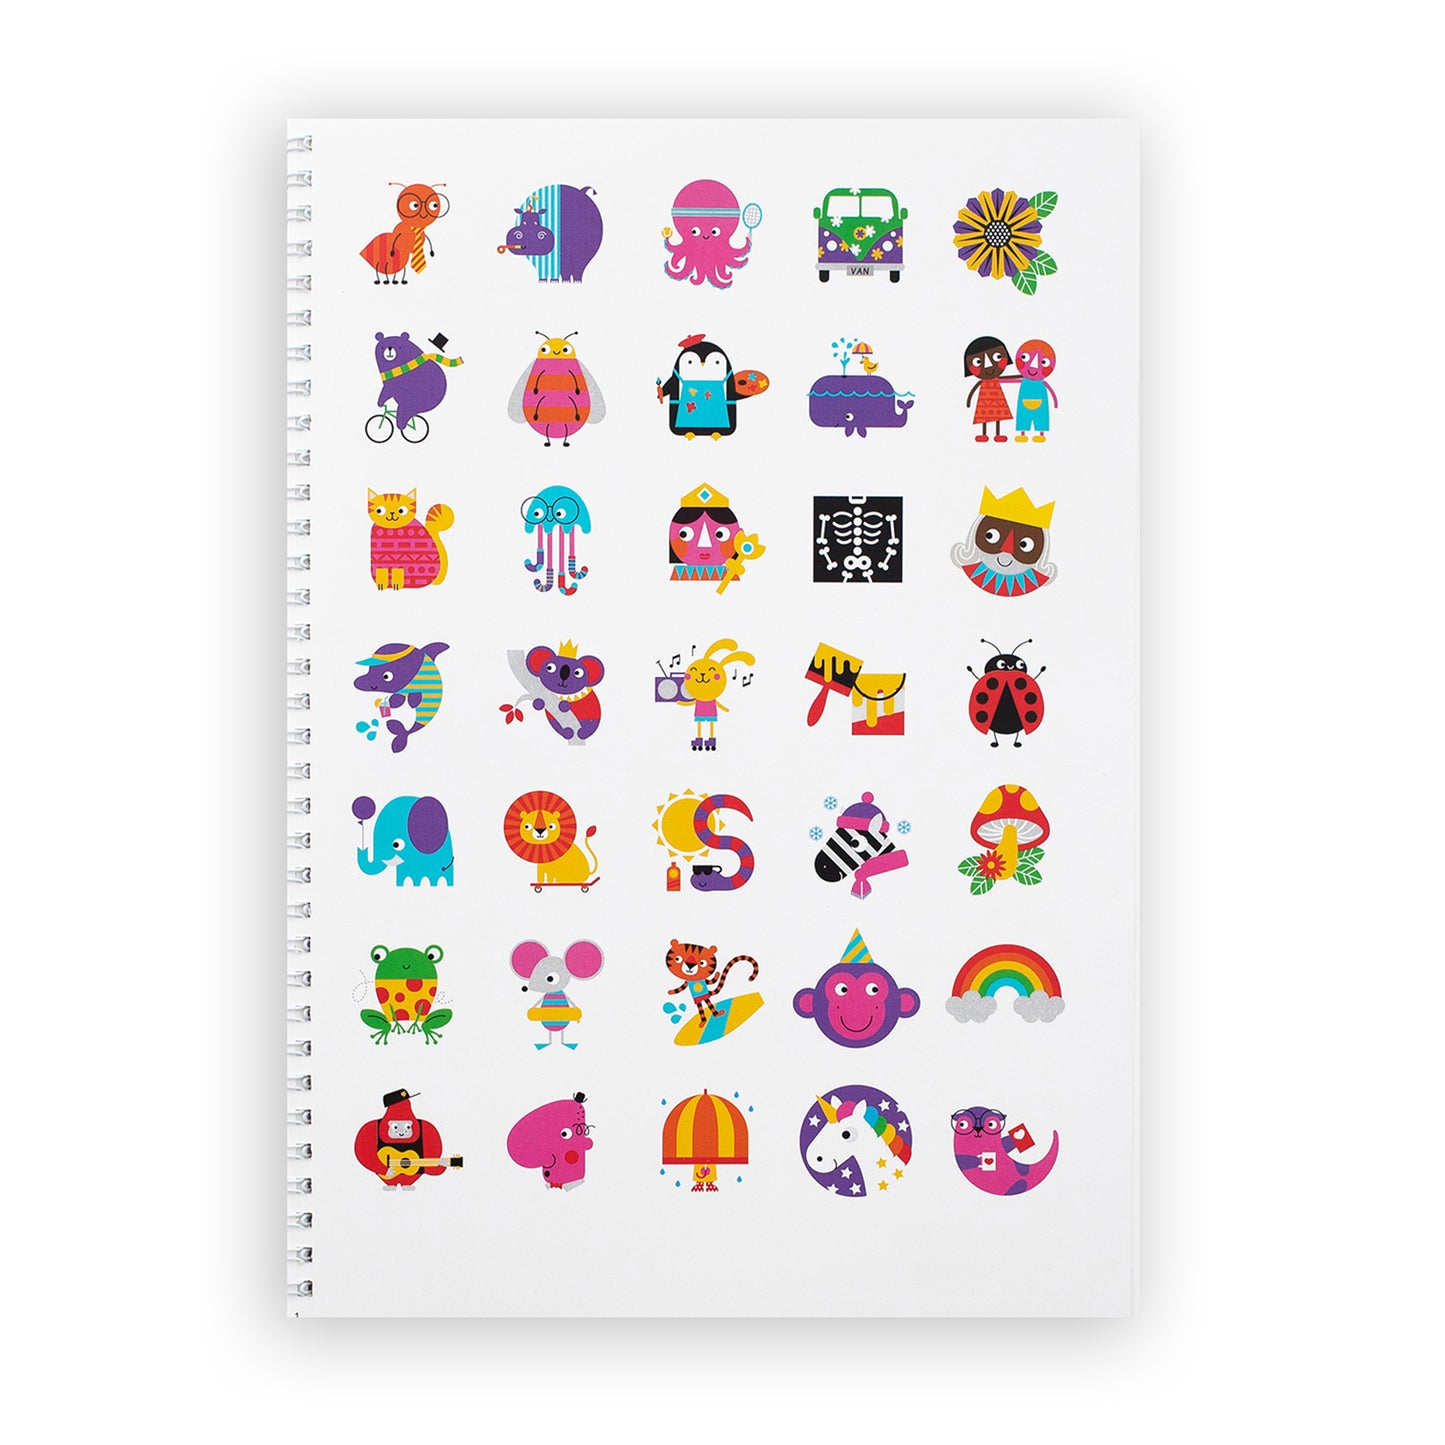 Acitivity book with stickers of animated characters